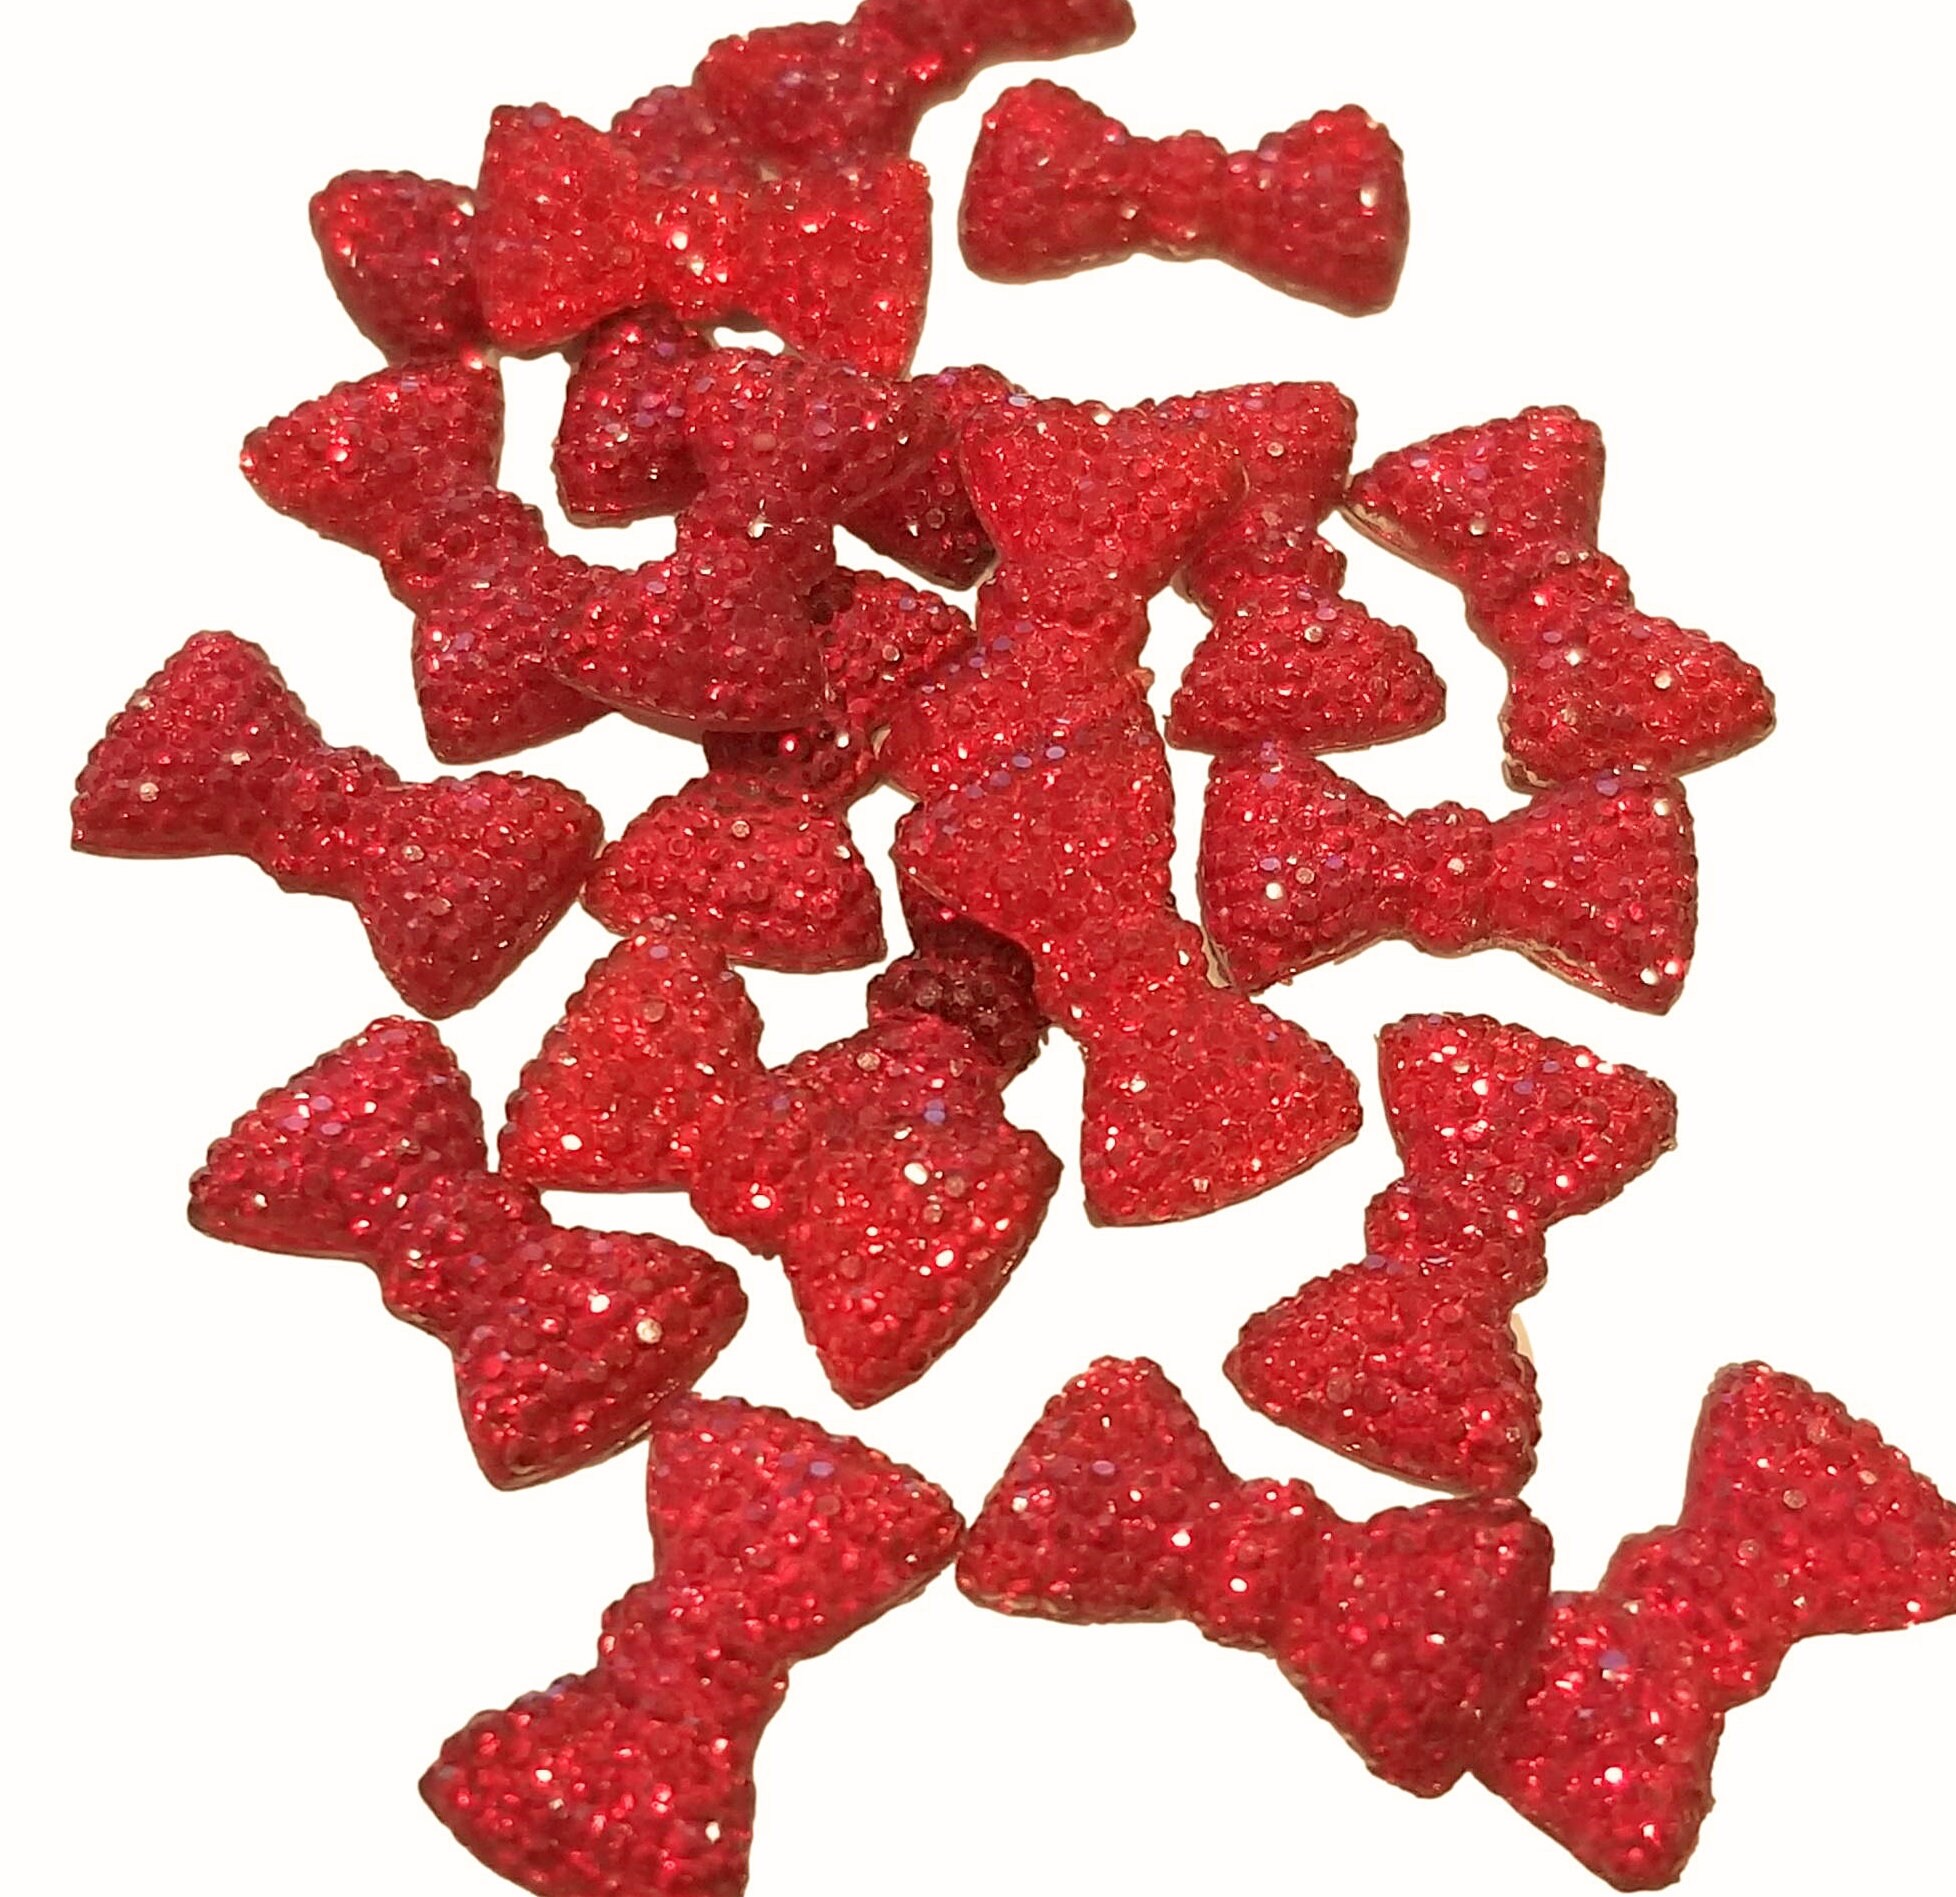 Shimmer White Pearls Pressed Candy - 2 LB Bulk Bag - All City Candy